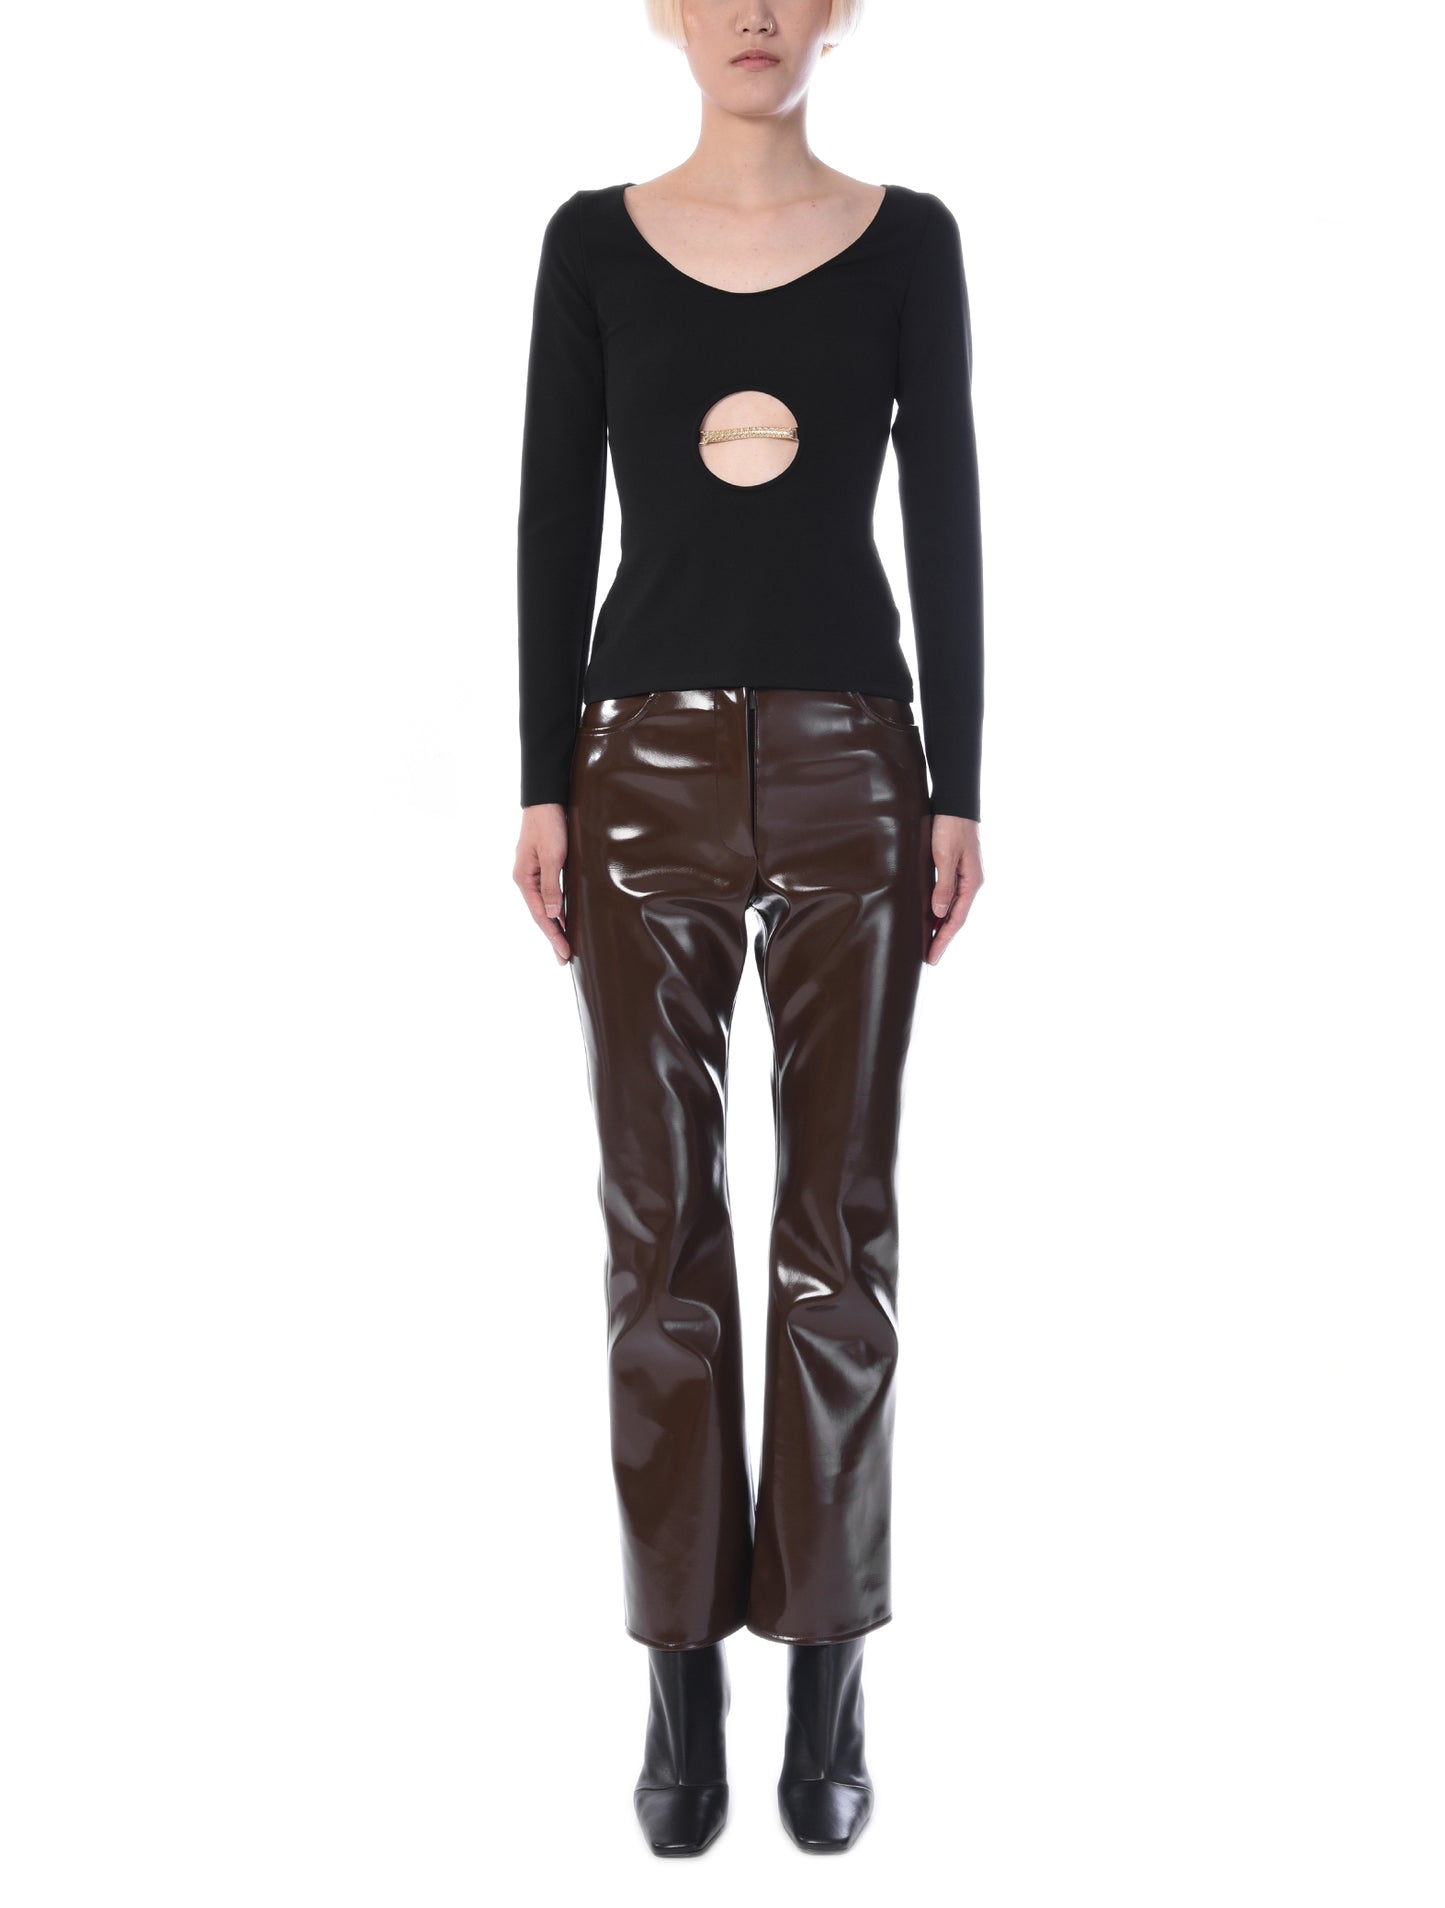 Christopher Kane Cut Out Chain Top